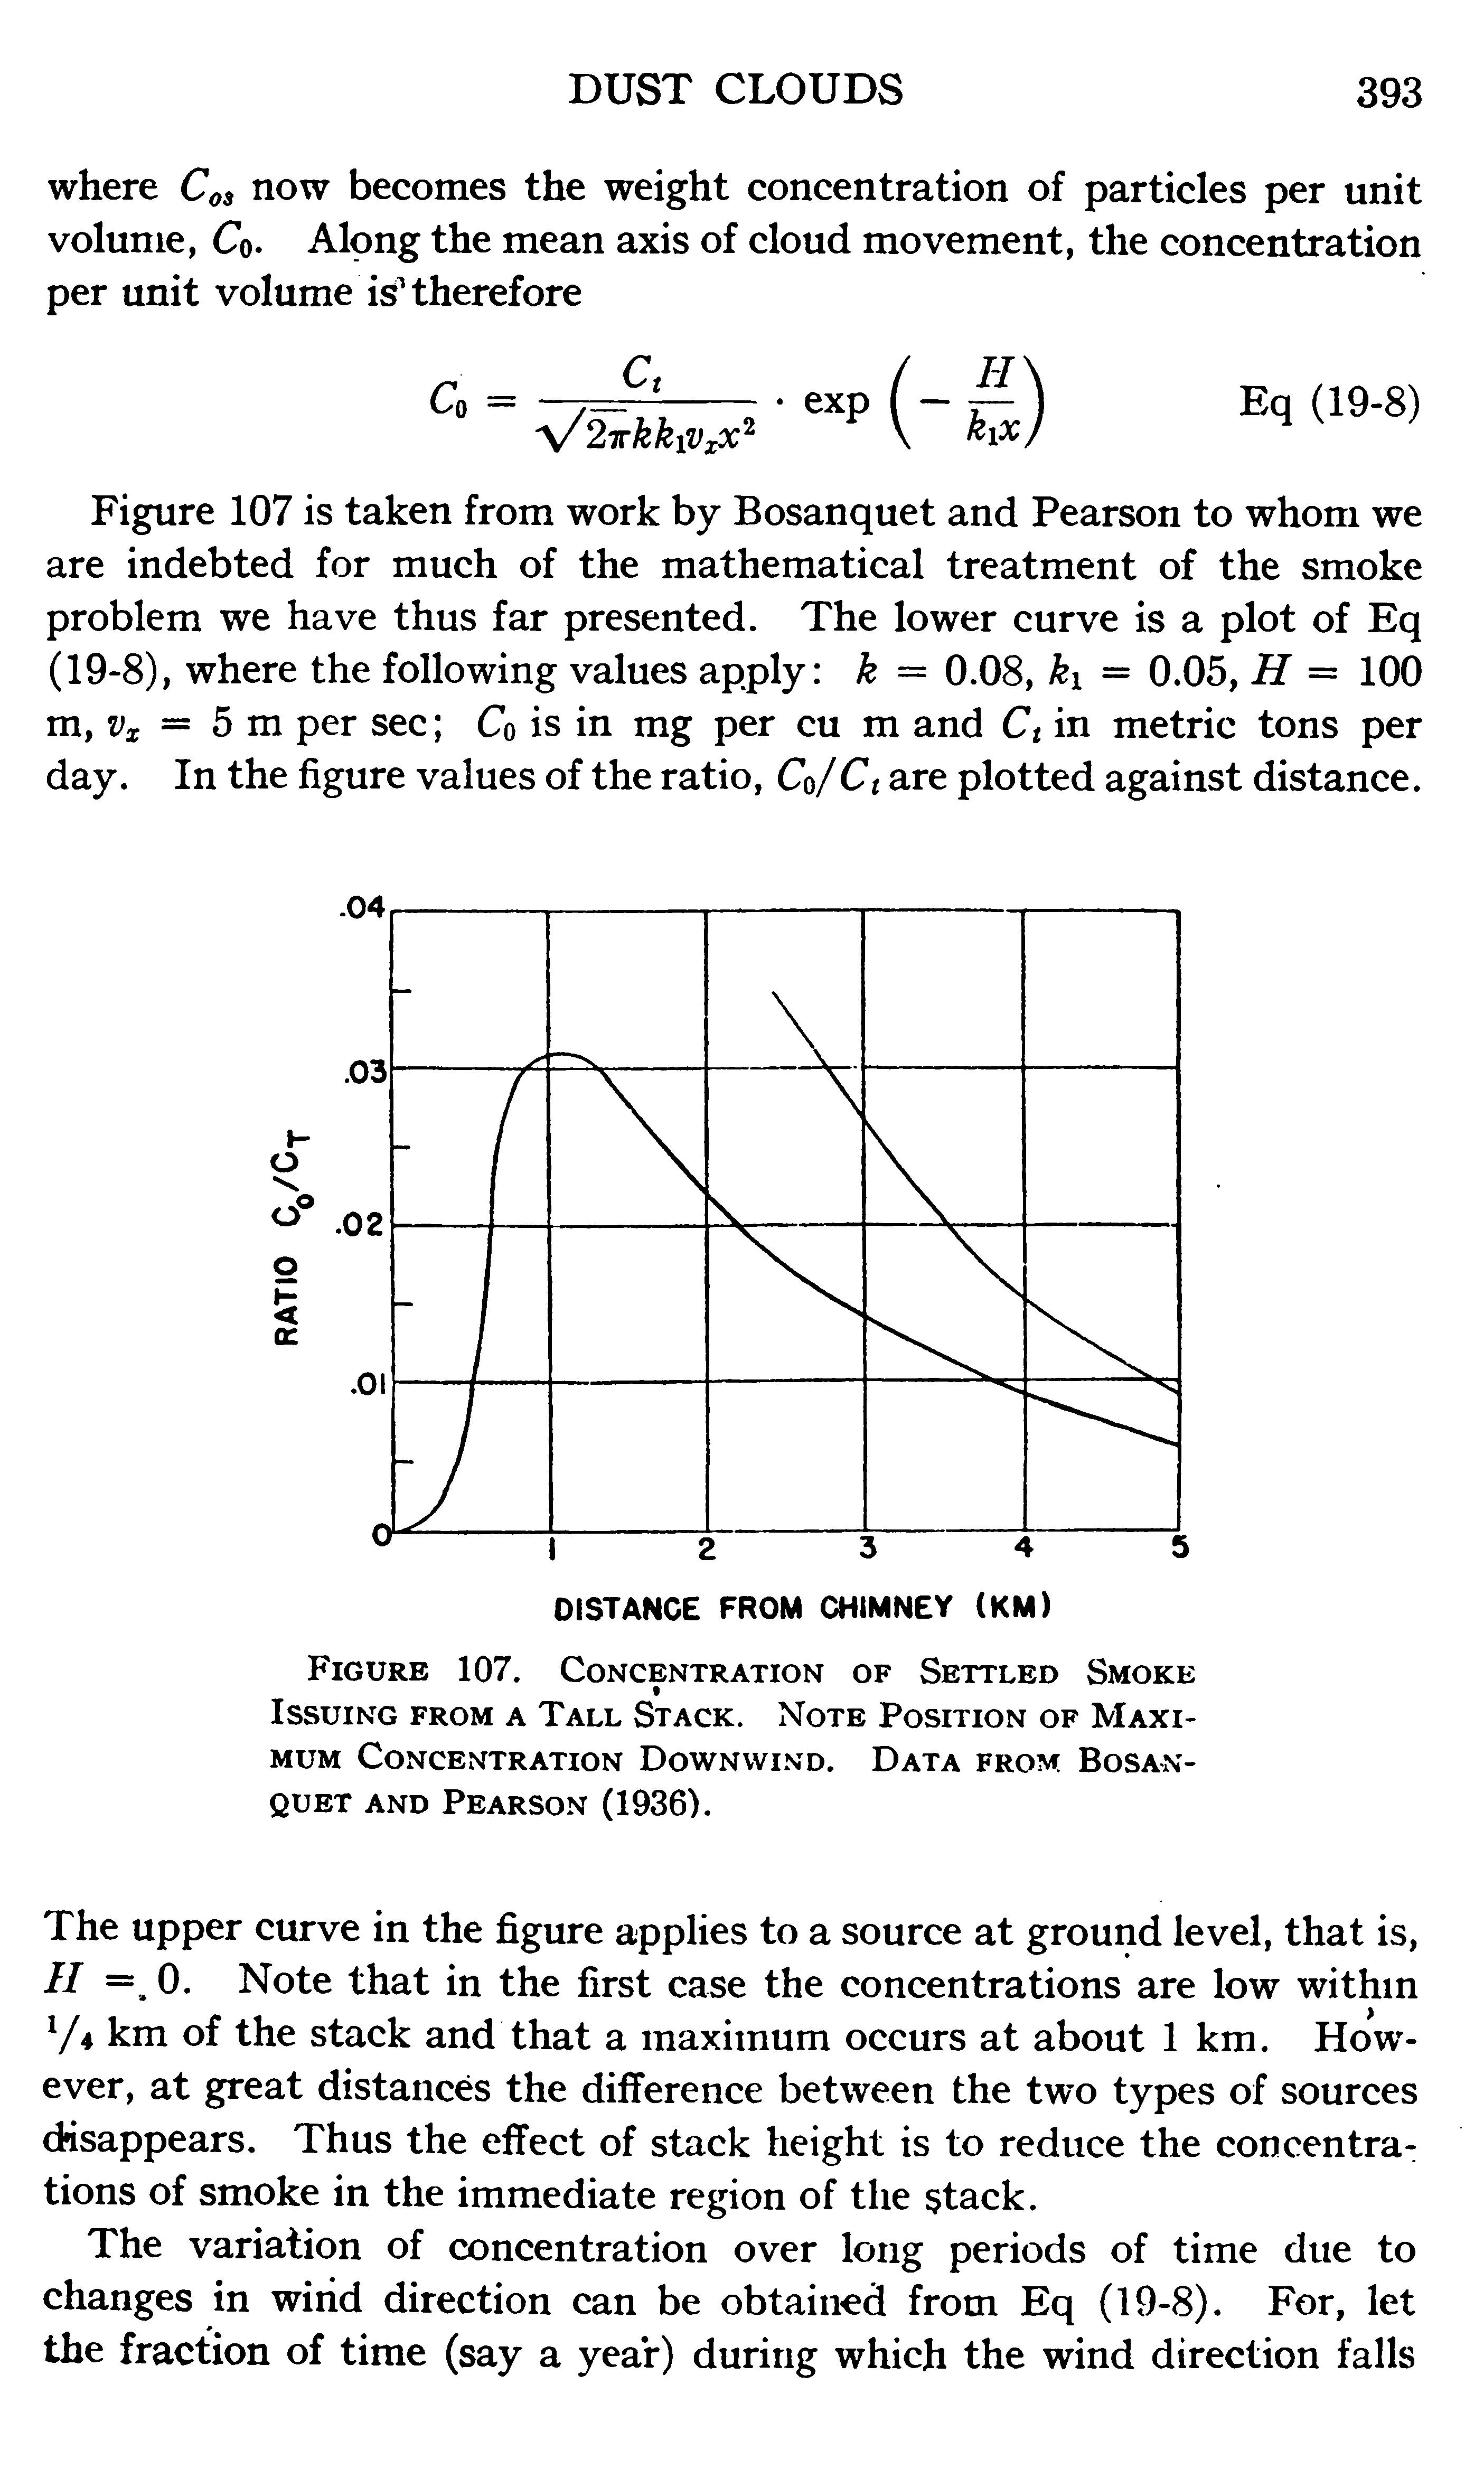 Figure 107. Concentration of Settled Smoke Issuing from a Tall Stack. Note Position of Maximum Concentration Downwind. Data from Bosanquet and Pearson (1936).